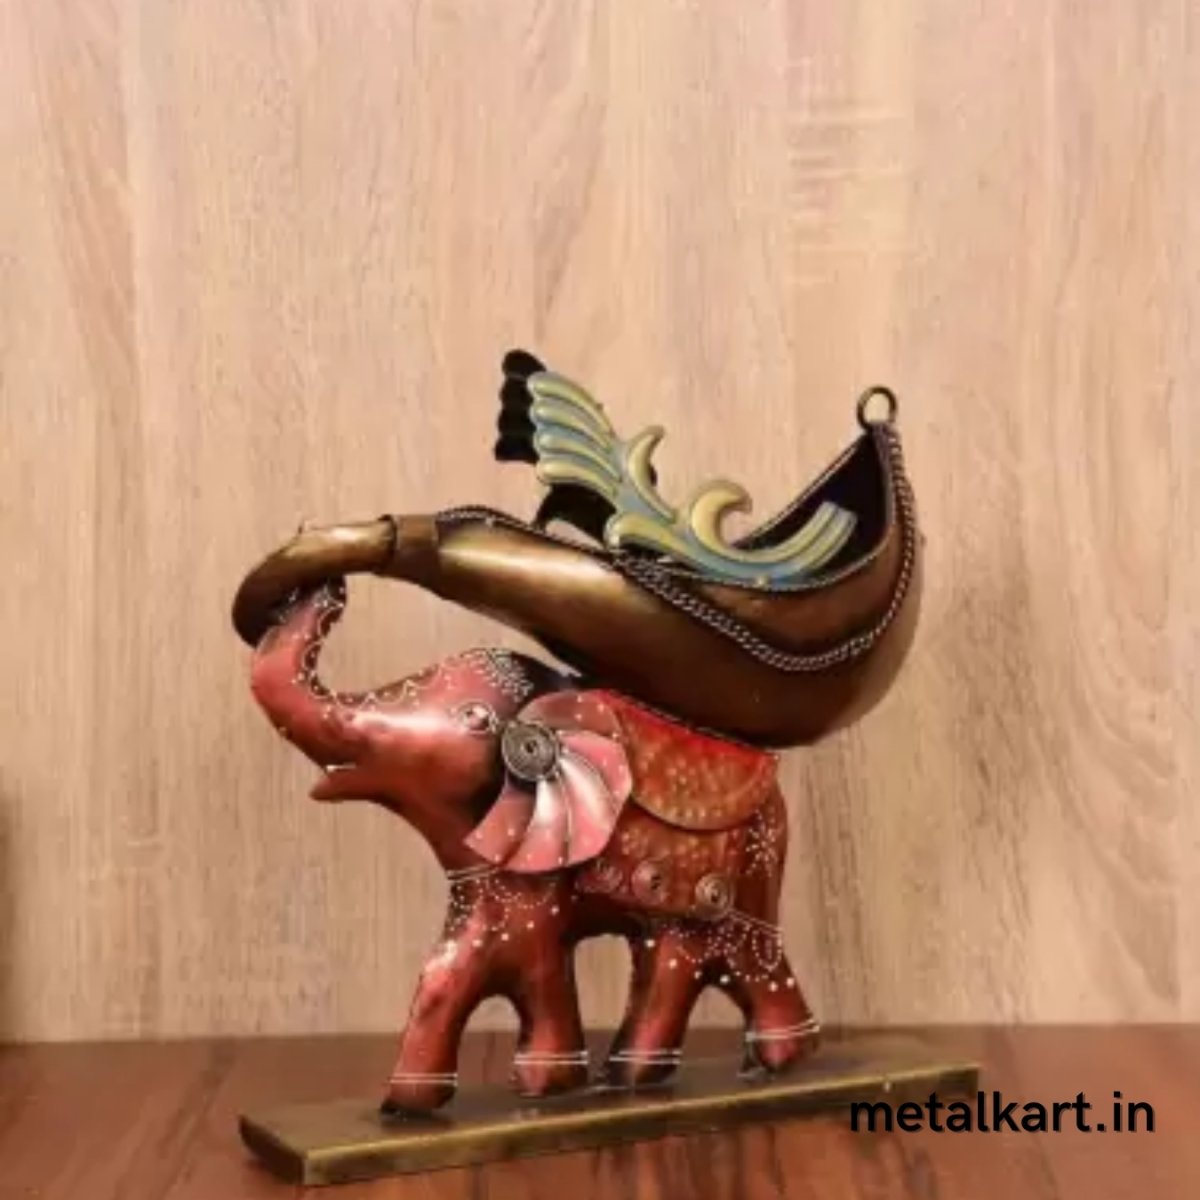 Metalkart Special Red Elephant Carrying Shankh Shaped Bottle Stand For living room (14*04*12 Inches)